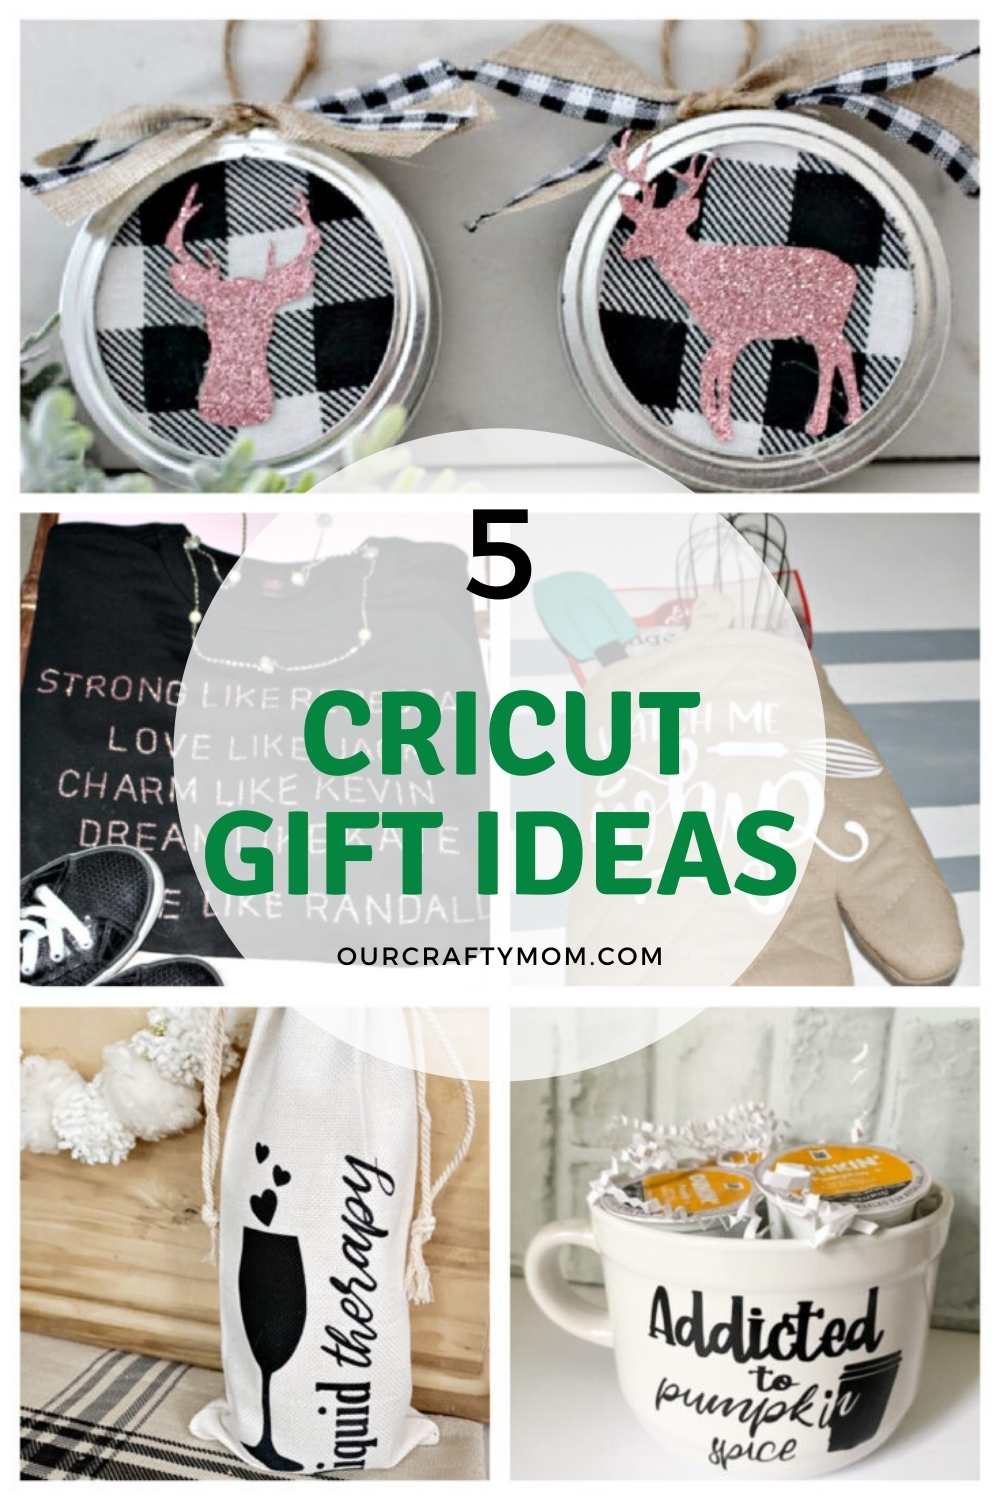 30+ Cricut Gift Ideas That Take 1 Hour Or Less To Make